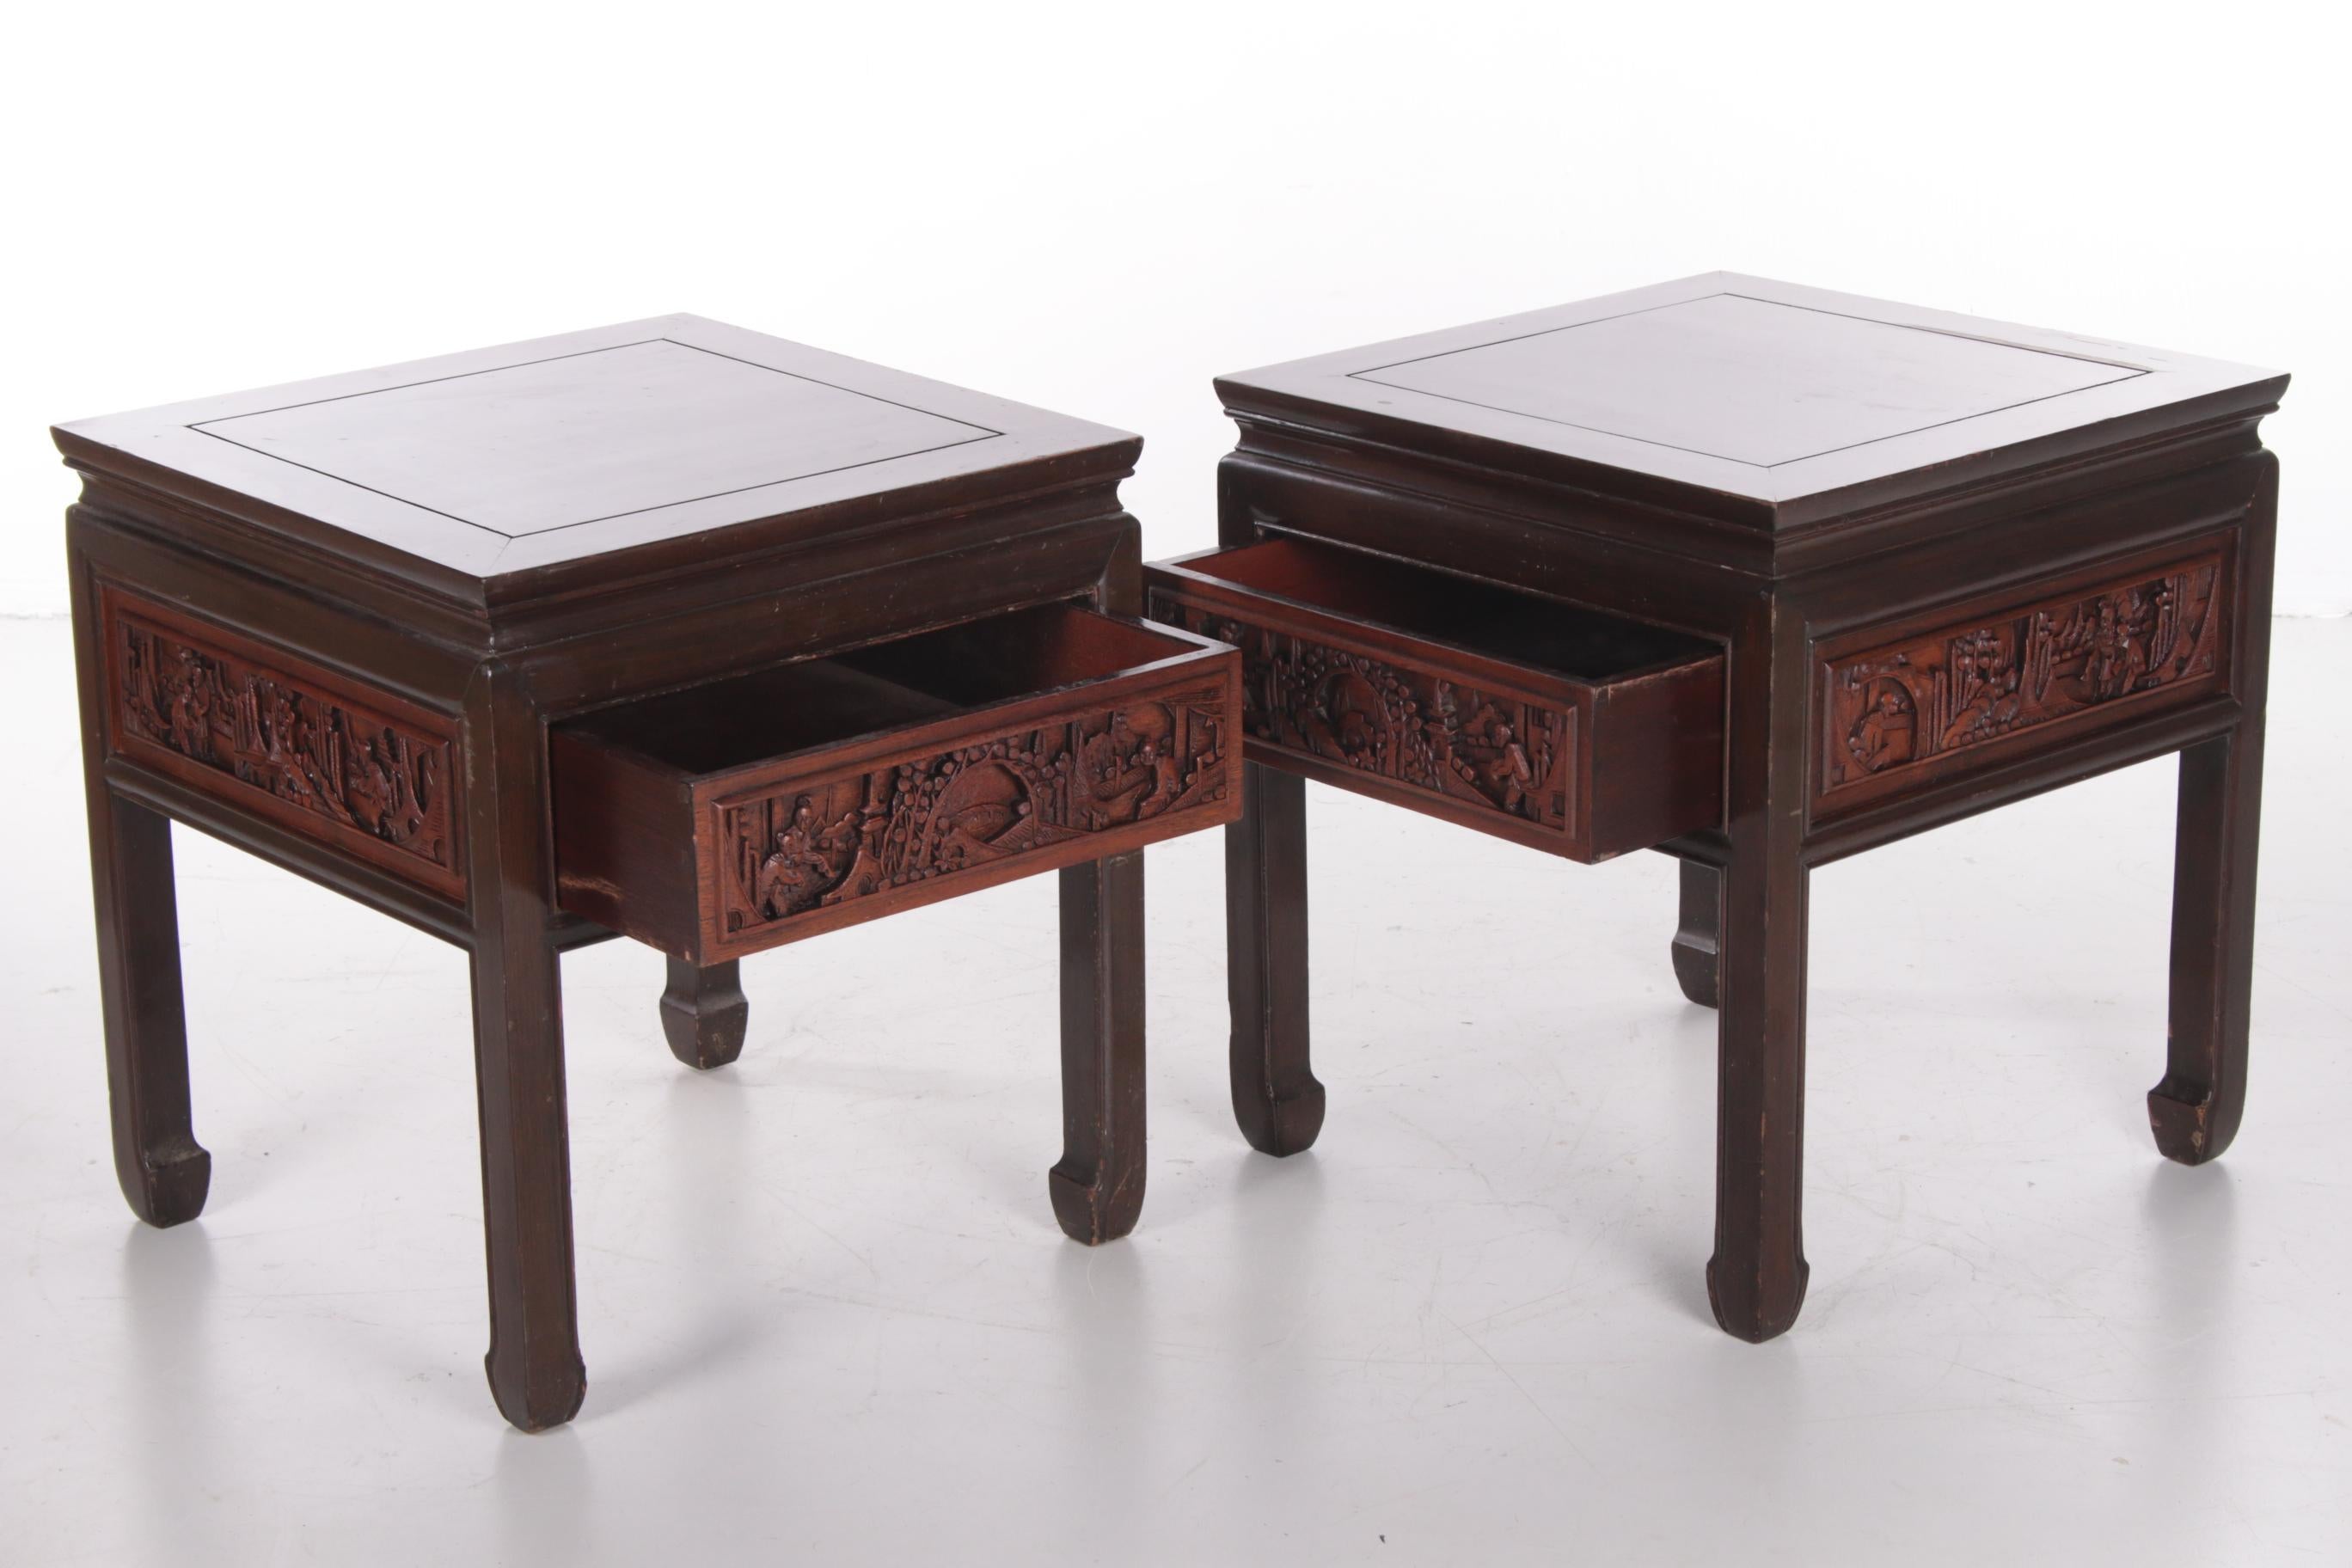 20th Century Chinese Wooden Bedside Tables with Beautiful Hand Carving 10